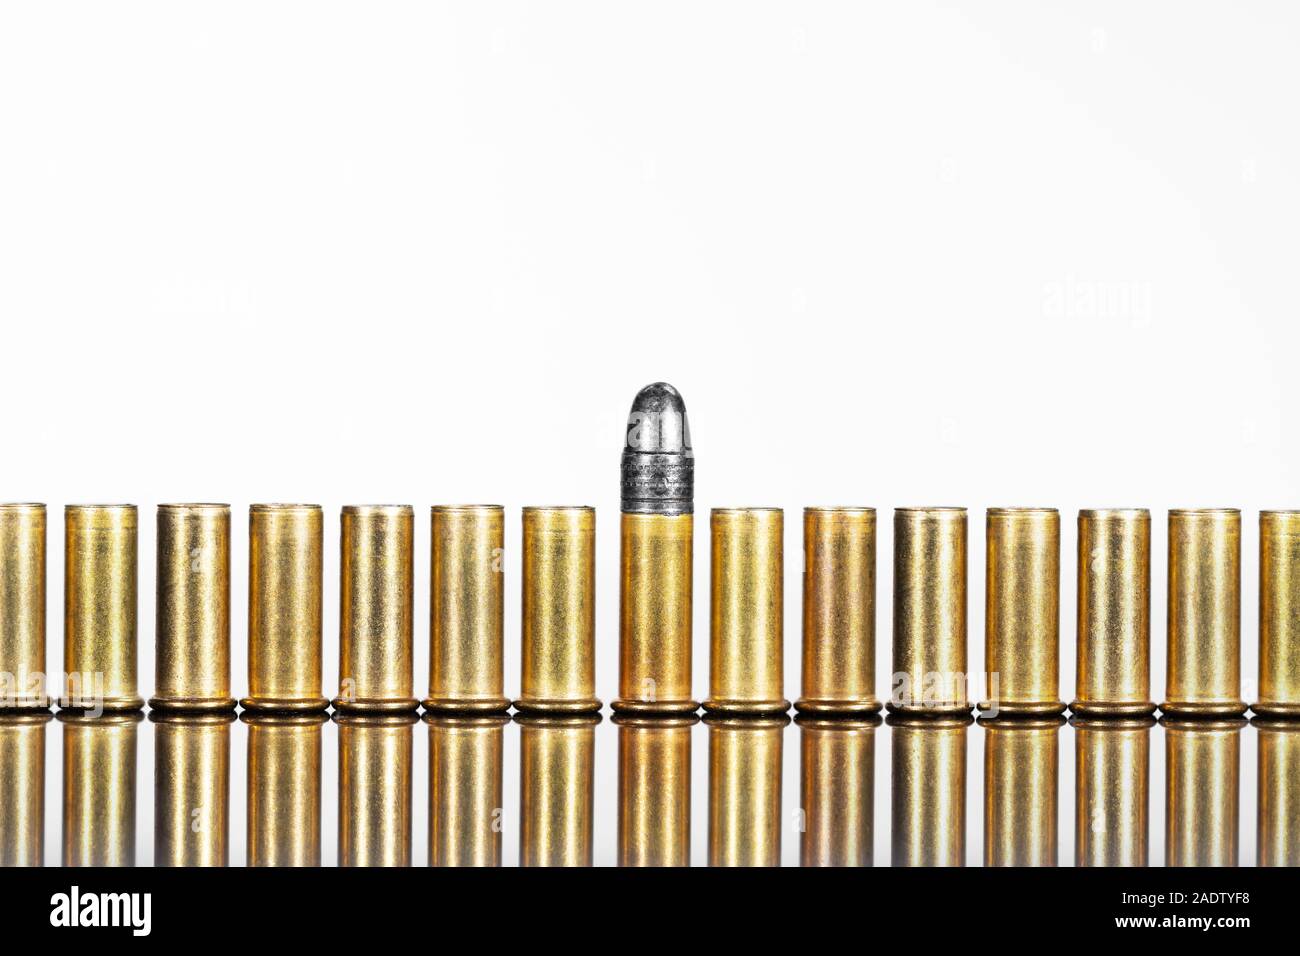 Series of cartridges or ammunition against white background, concepts such as business or arms exports Stock Photo